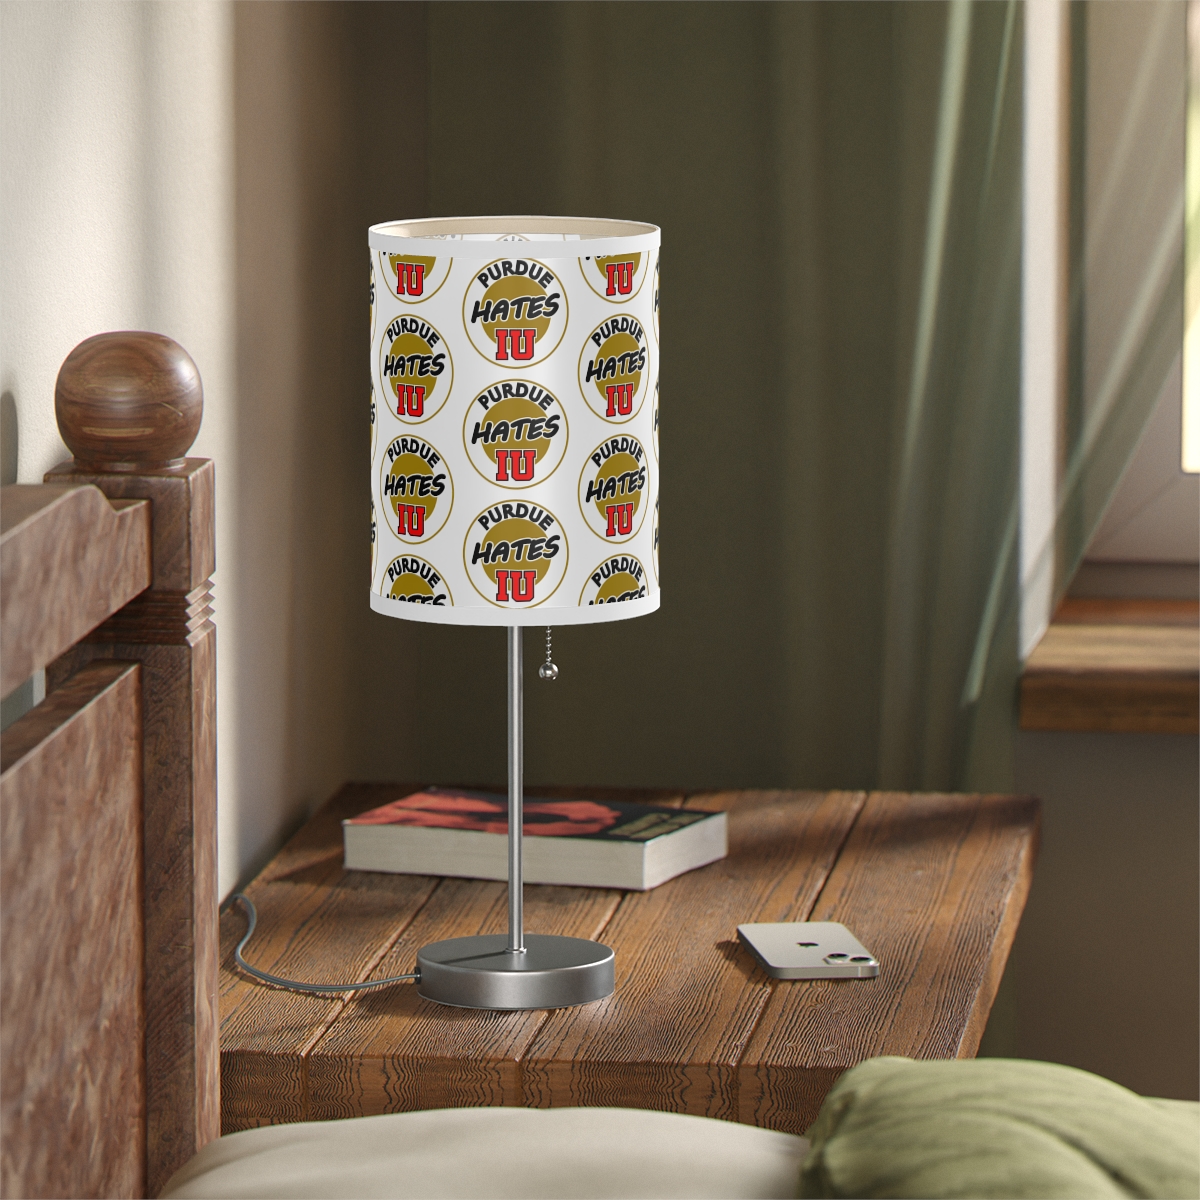 Purdue Hates IU Lamp on a Stand product thumbnail image